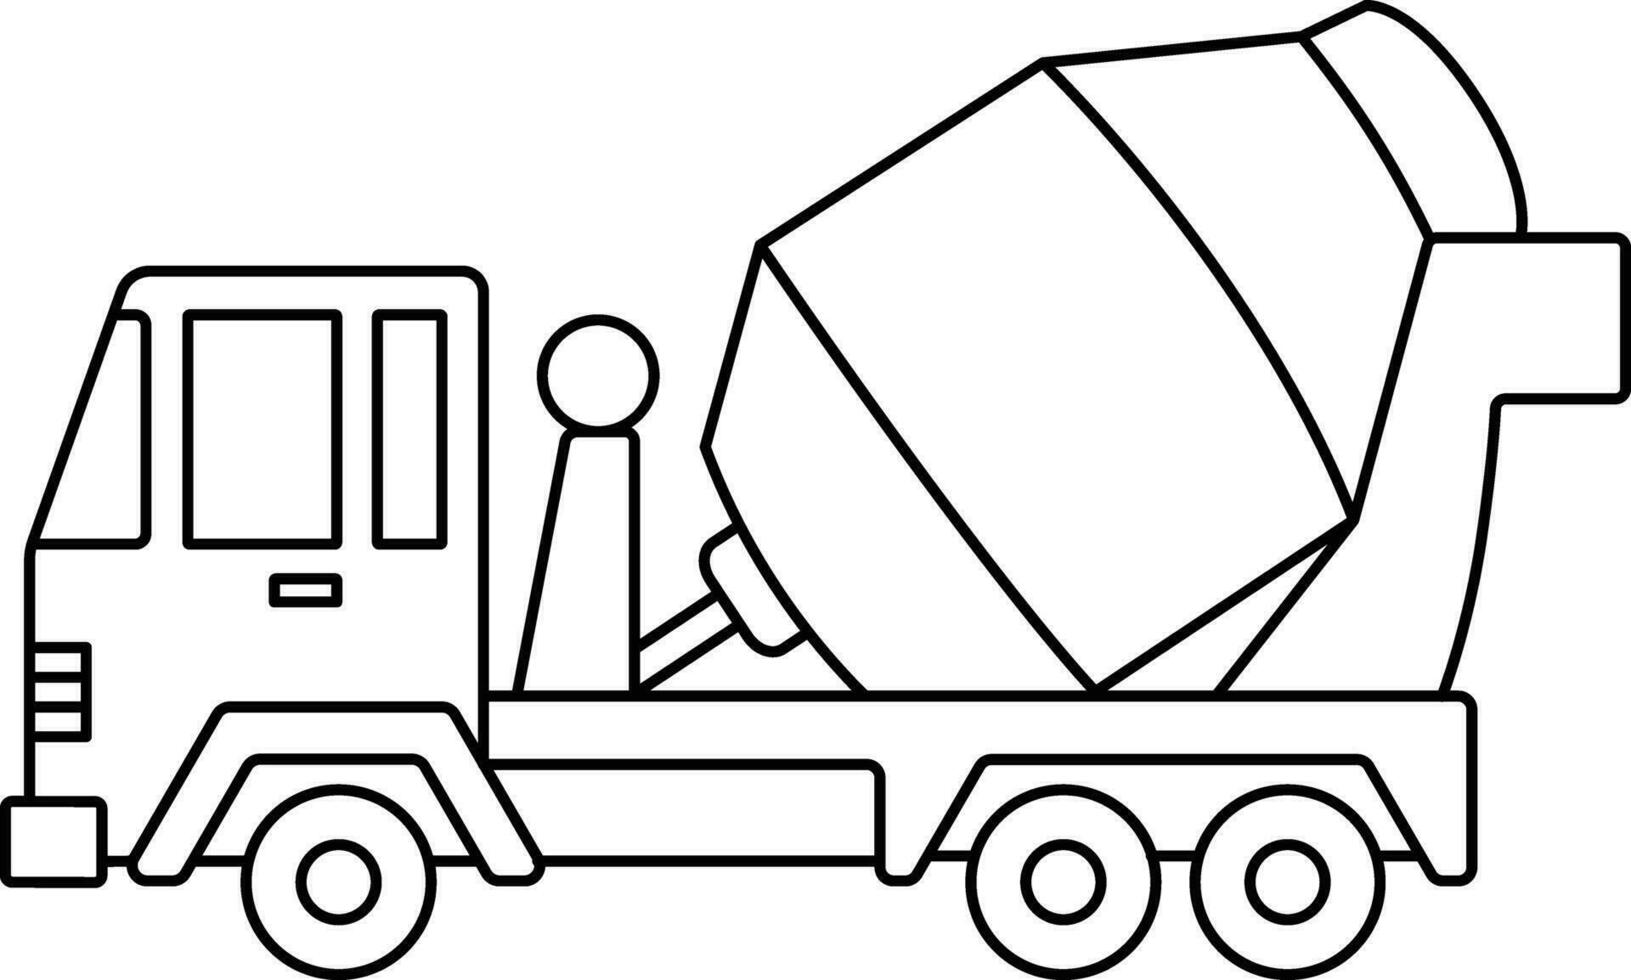 Concrete Mixer Truck with black isolated line design. A Truck Vector illustration design.